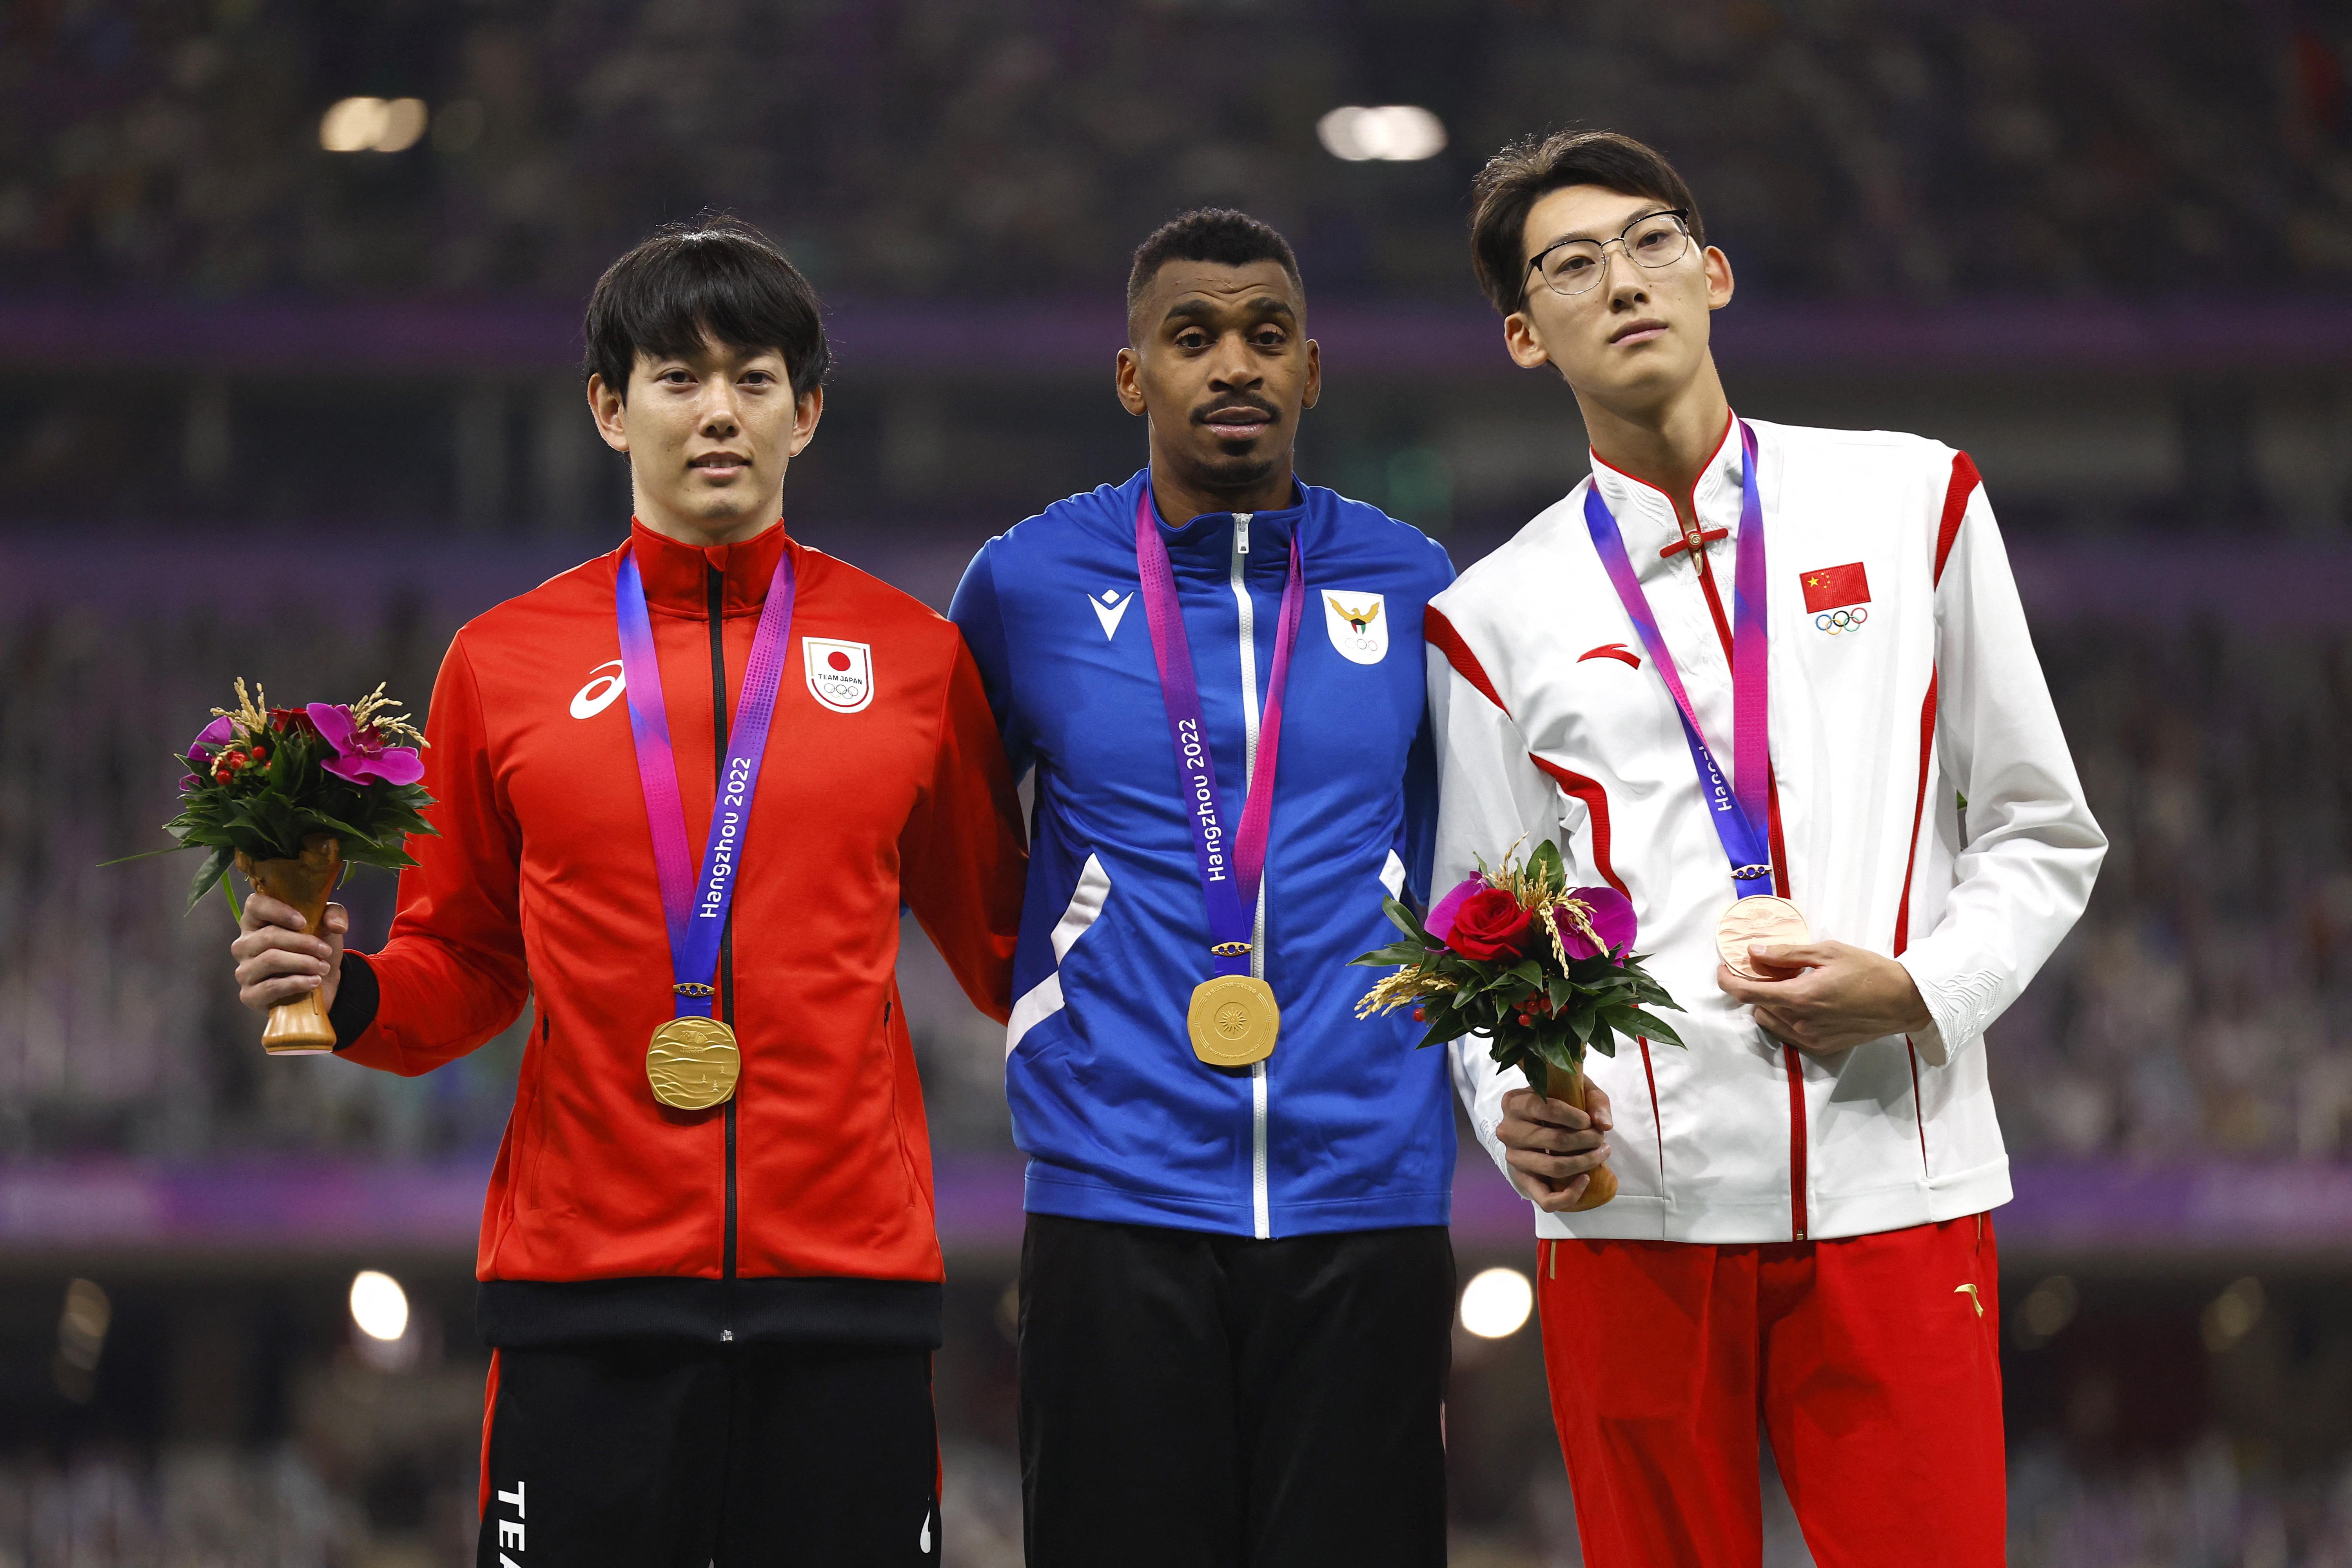 Hurdlers take dual golds, North Korea set another weightlifting record |  Reuters